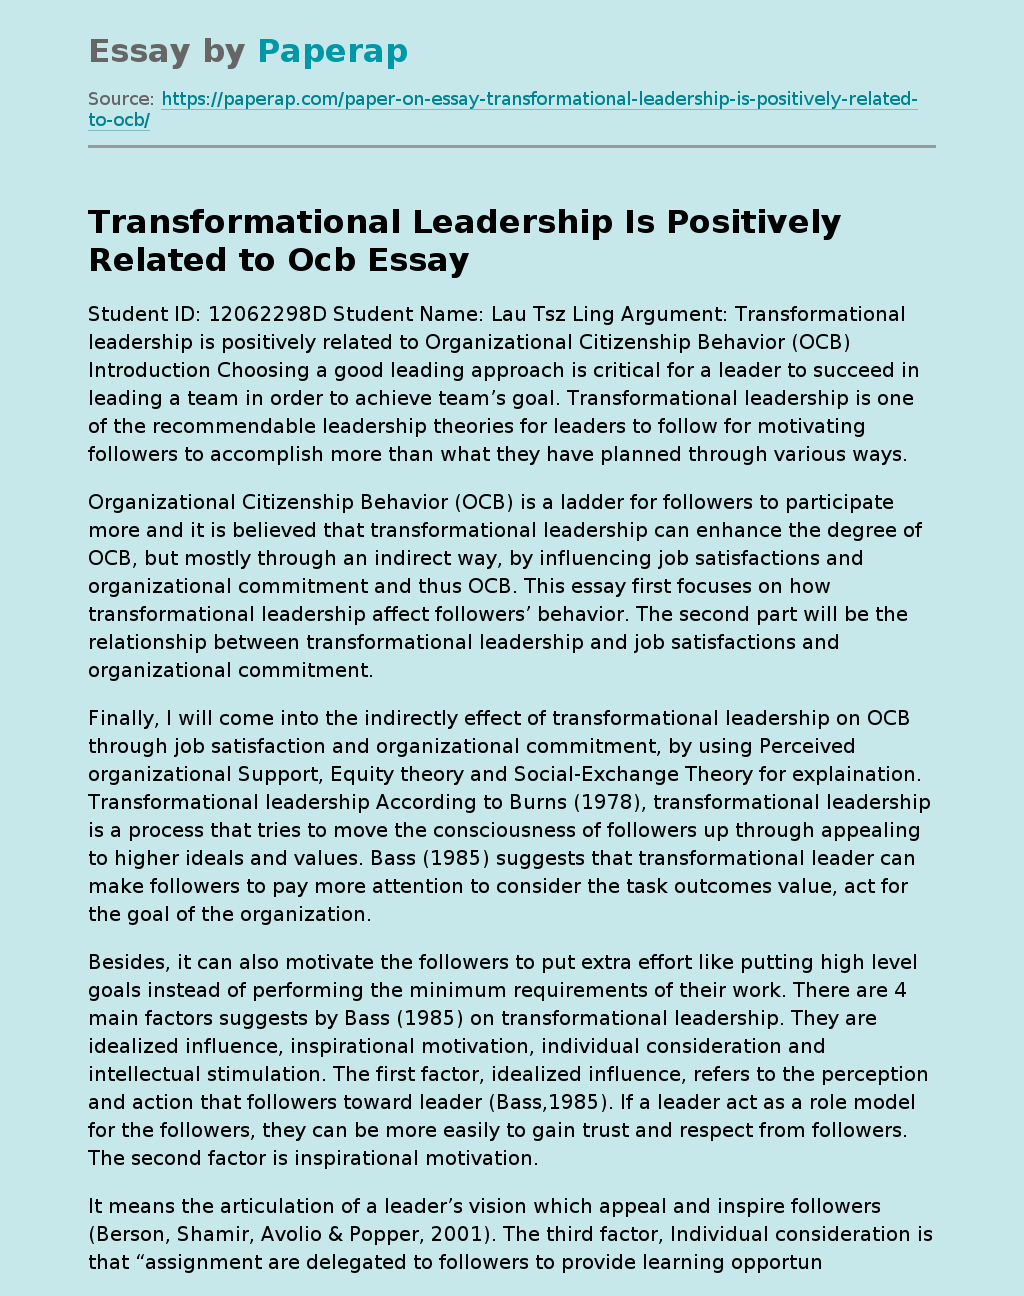 Transformational Leadership Is Positively Related to Ocb